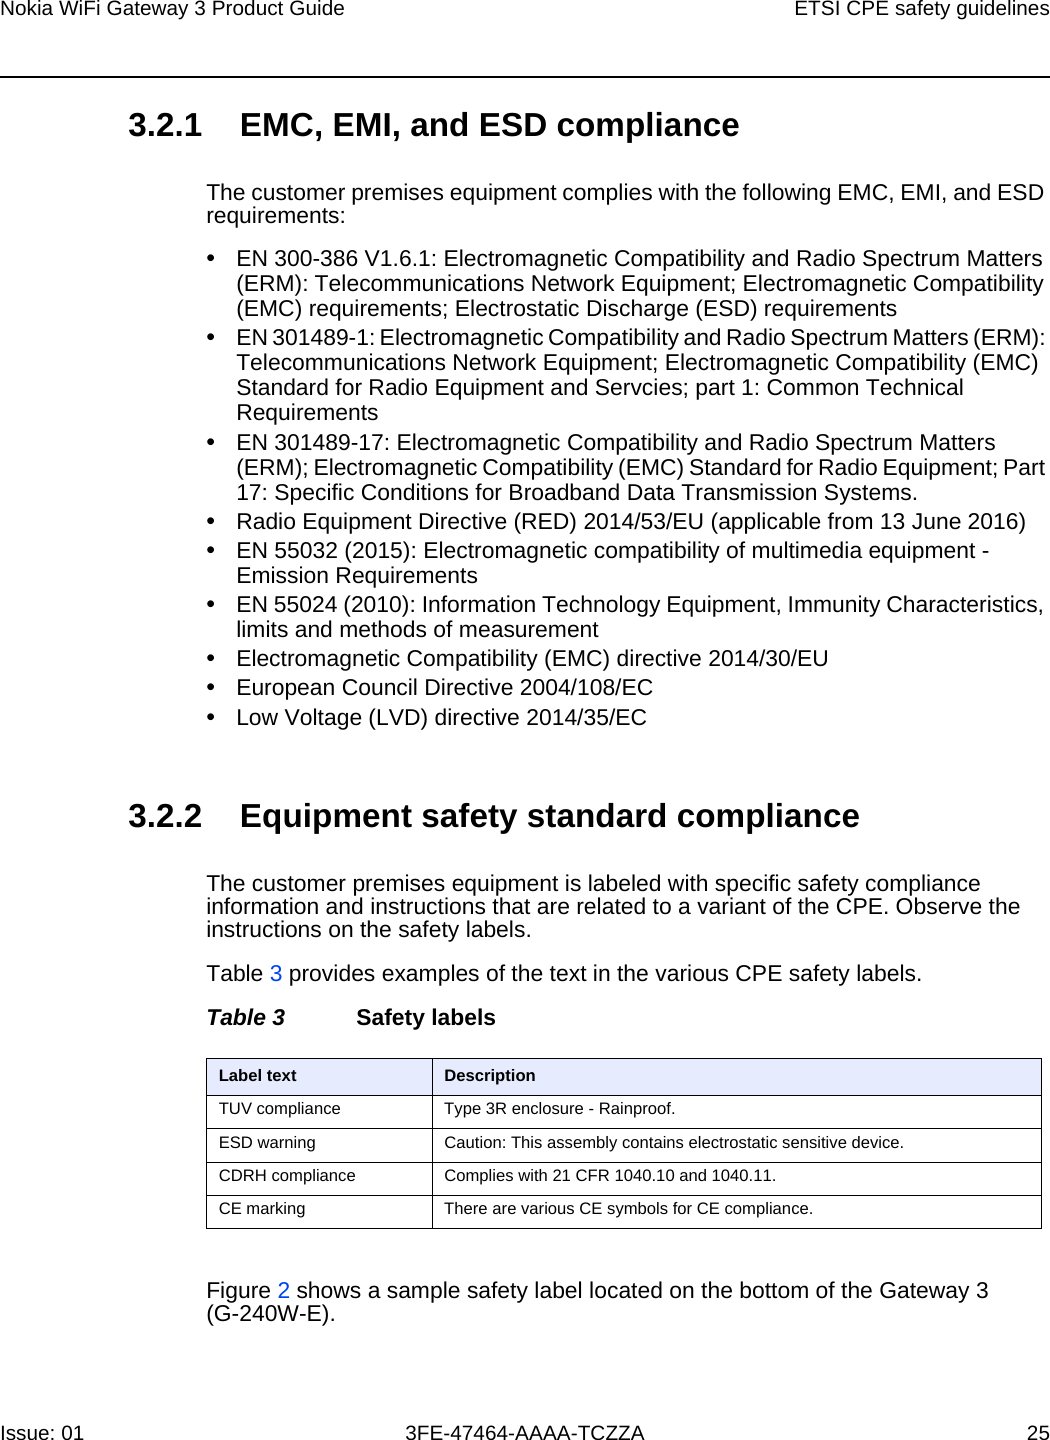 Nokia WiFi Gateway 3 Product Guide ETSI CPE safety guidelinesIssue: 01 3FE-47464-AAAA-TCZZA 25 3.2.1 EMC, EMI, and ESD complianceThe customer premises equipment complies with the following EMC, EMI, and ESD requirements:•EN 300-386 V1.6.1: Electromagnetic Compatibility and Radio Spectrum Matters (ERM): Telecommunications Network Equipment; Electromagnetic Compatibility (EMC) requirements; Electrostatic Discharge (ESD) requirements•EN 301489-1: Electromagnetic Compatibility and Radio Spectrum Matters (ERM): Telecommunications Network Equipment; Electromagnetic Compatibility (EMC) Standard for Radio Equipment and Servcies; part 1: Common Technical Requirements•EN 301489-17: Electromagnetic Compatibility and Radio Spectrum Matters (ERM); Electromagnetic Compatibility (EMC) Standard for Radio Equipment; Part 17: Specific Conditions for Broadband Data Transmission Systems.•Radio Equipment Directive (RED) 2014/53/EU (applicable from 13 June 2016)•EN 55032 (2015): Electromagnetic compatibility of multimedia equipment - Emission Requirements•EN 55024 (2010): Information Technology Equipment, Immunity Characteristics, limits and methods of measurement•Electromagnetic Compatibility (EMC) directive 2014/30/EU•European Council Directive 2004/108/EC•Low Voltage (LVD) directive 2014/35/EC3.2.2 Equipment safety standard complianceThe customer premises equipment is labeled with specific safety compliance information and instructions that are related to a variant of the CPE. Observe the instructions on the safety labels.Table 3 provides examples of the text in the various CPE safety labels.Table 3 Safety labelsFigure 2 shows a sample safety label located on the bottom of the Gateway 3 (G-240W-E).Label text DescriptionTUV compliance Type 3R enclosure - Rainproof.ESD warning Caution: This assembly contains electrostatic sensitive device.CDRH compliance Complies with 21 CFR 1040.10 and 1040.11.CE marking There are various CE symbols for CE compliance.